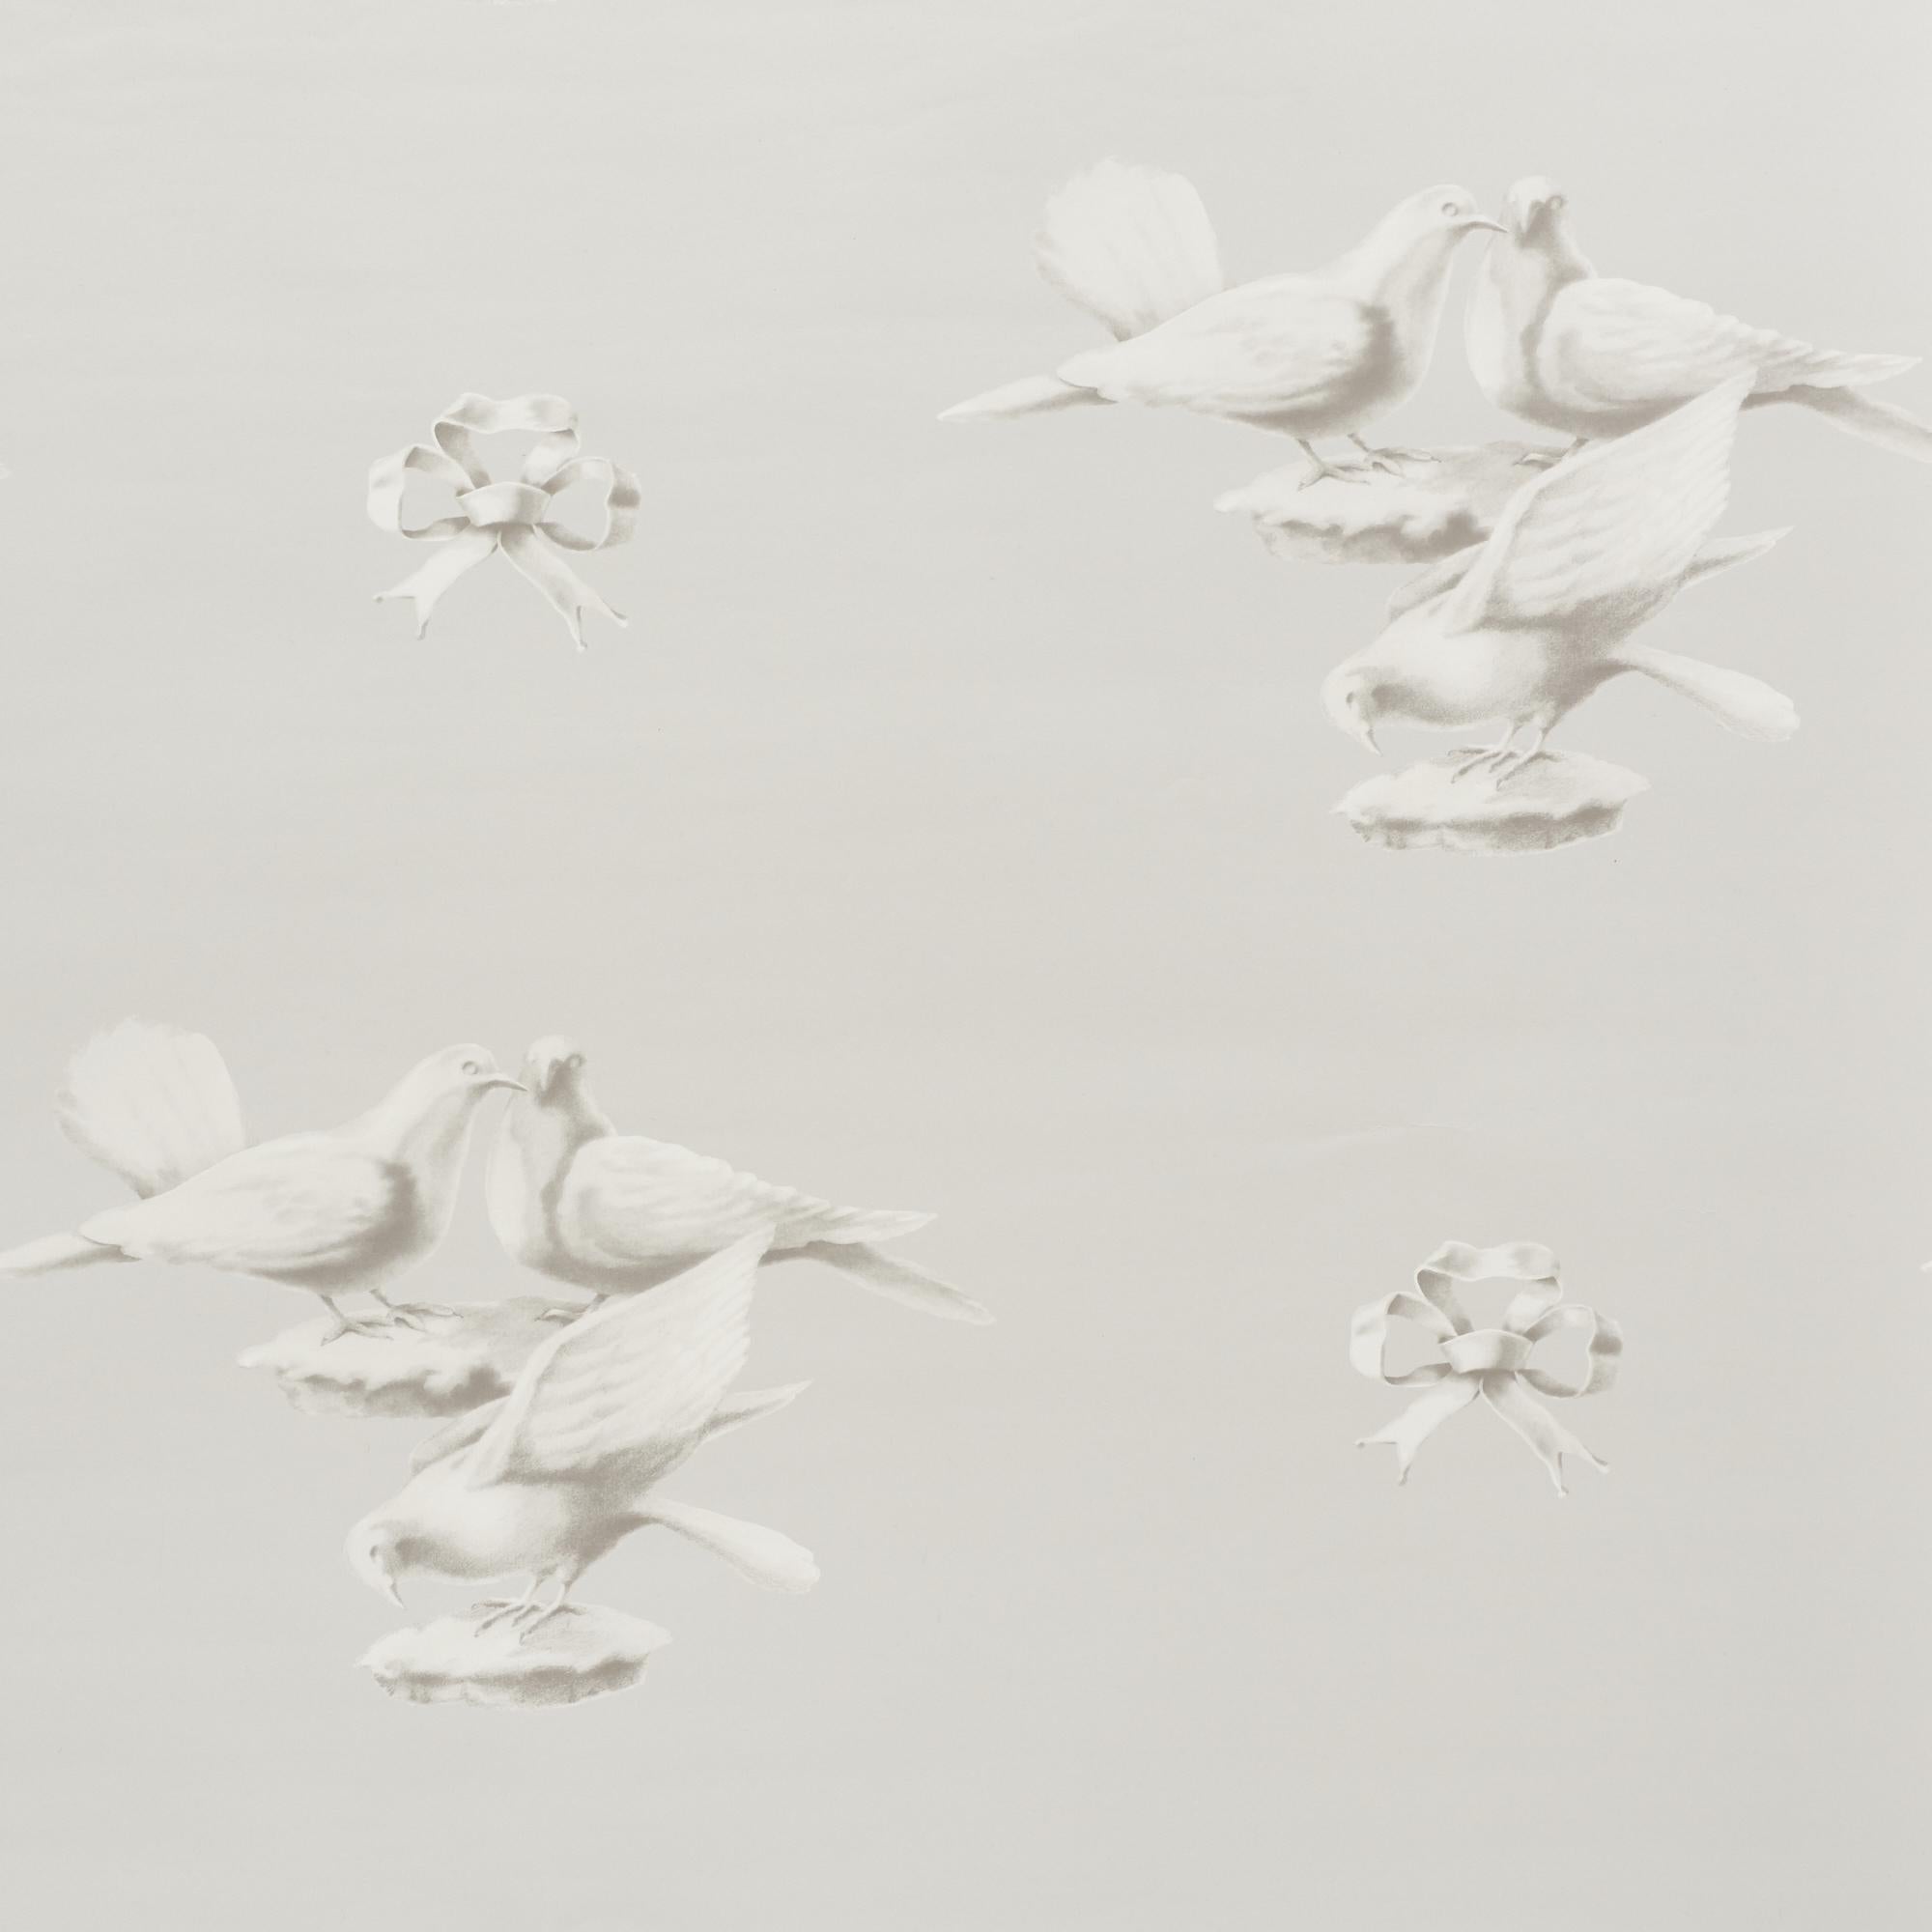 Soft and spare, these exquisite hand-drawn birds appear to have been carved from stone. The large-scale pattern is an homage to Gertrude Stein and a stylish statement.

Since Schumacher was founded in 1889, our family-owned company has been